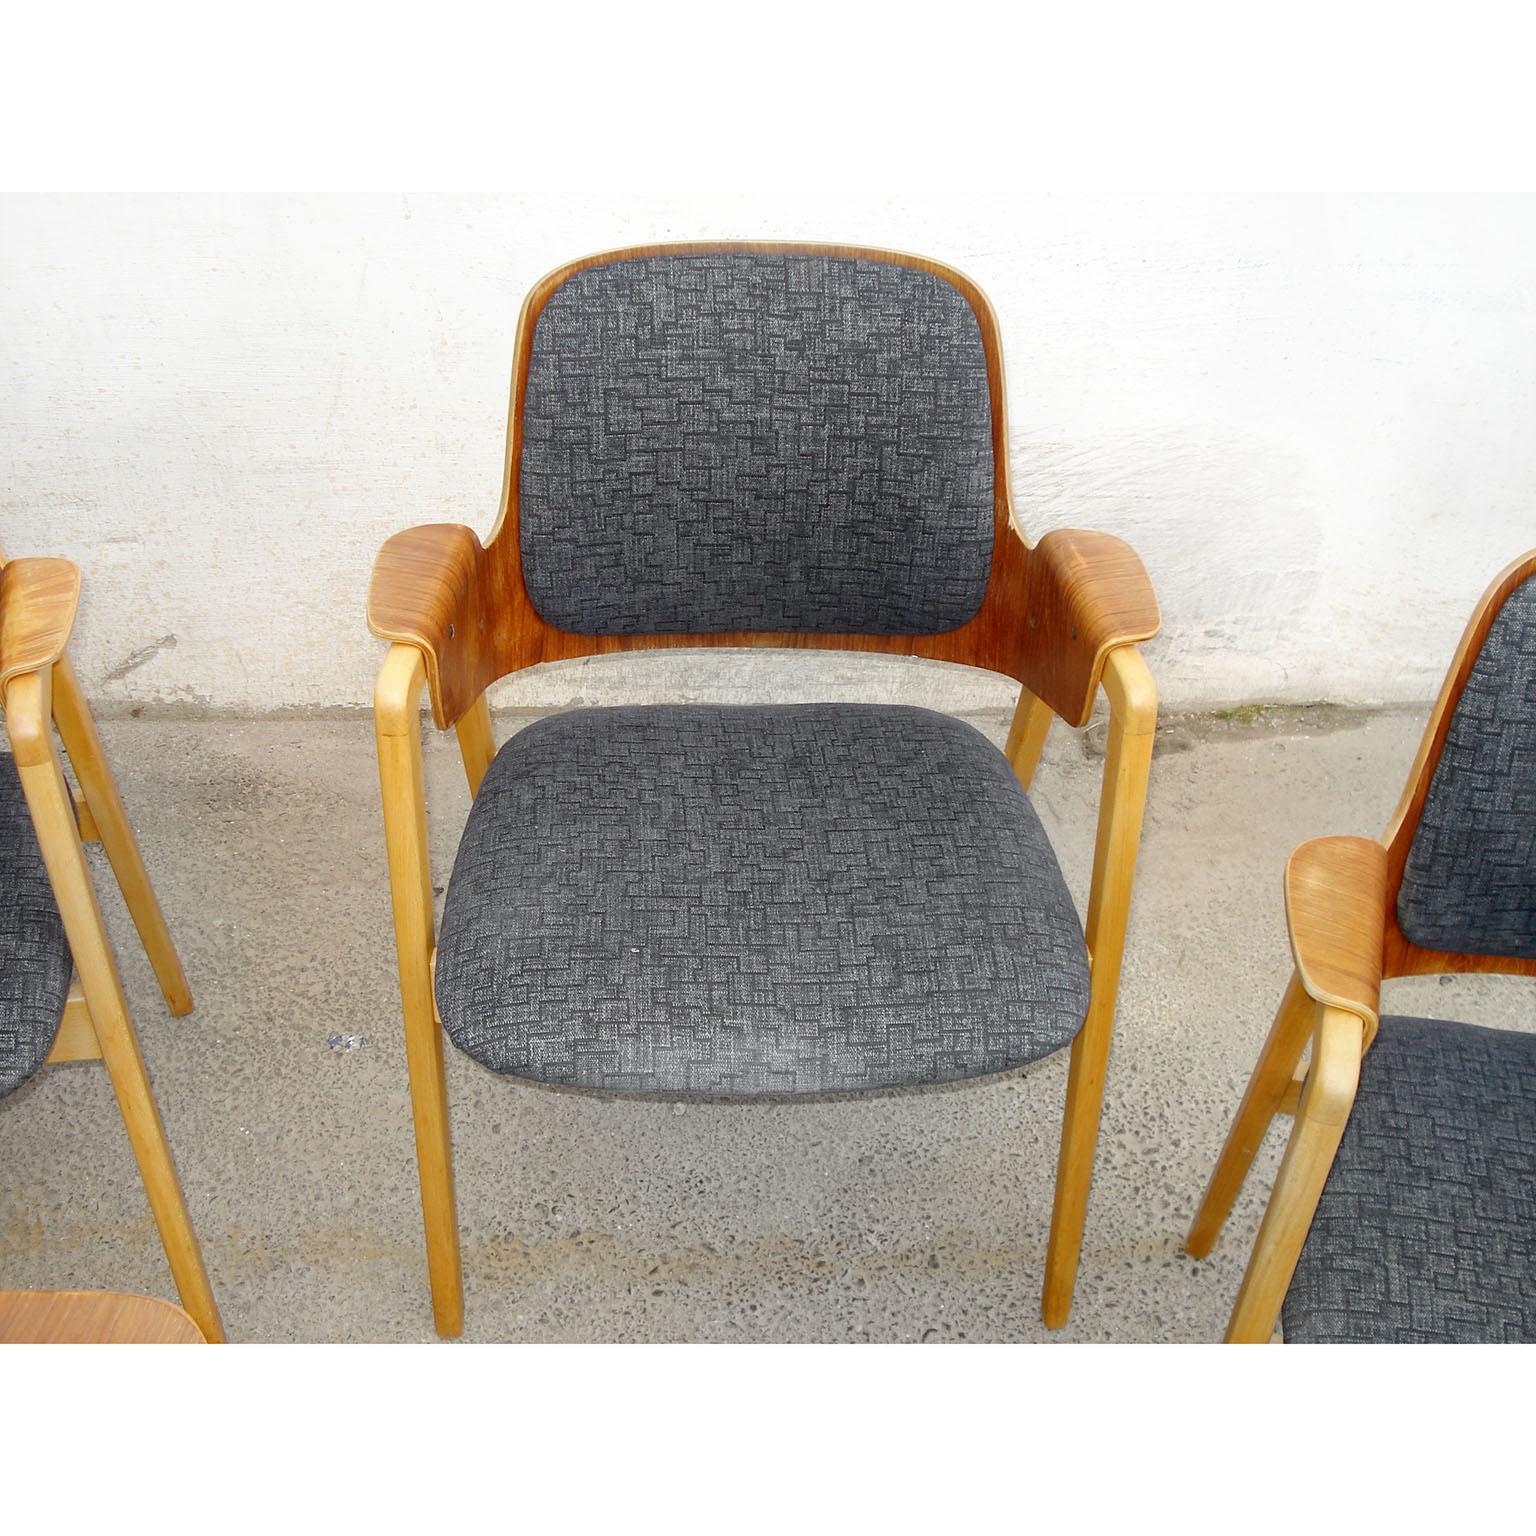 Set of 4 Elias Barup Teak Dining Chairs with Original Upholstery, 1950s Sweden For Sale 2